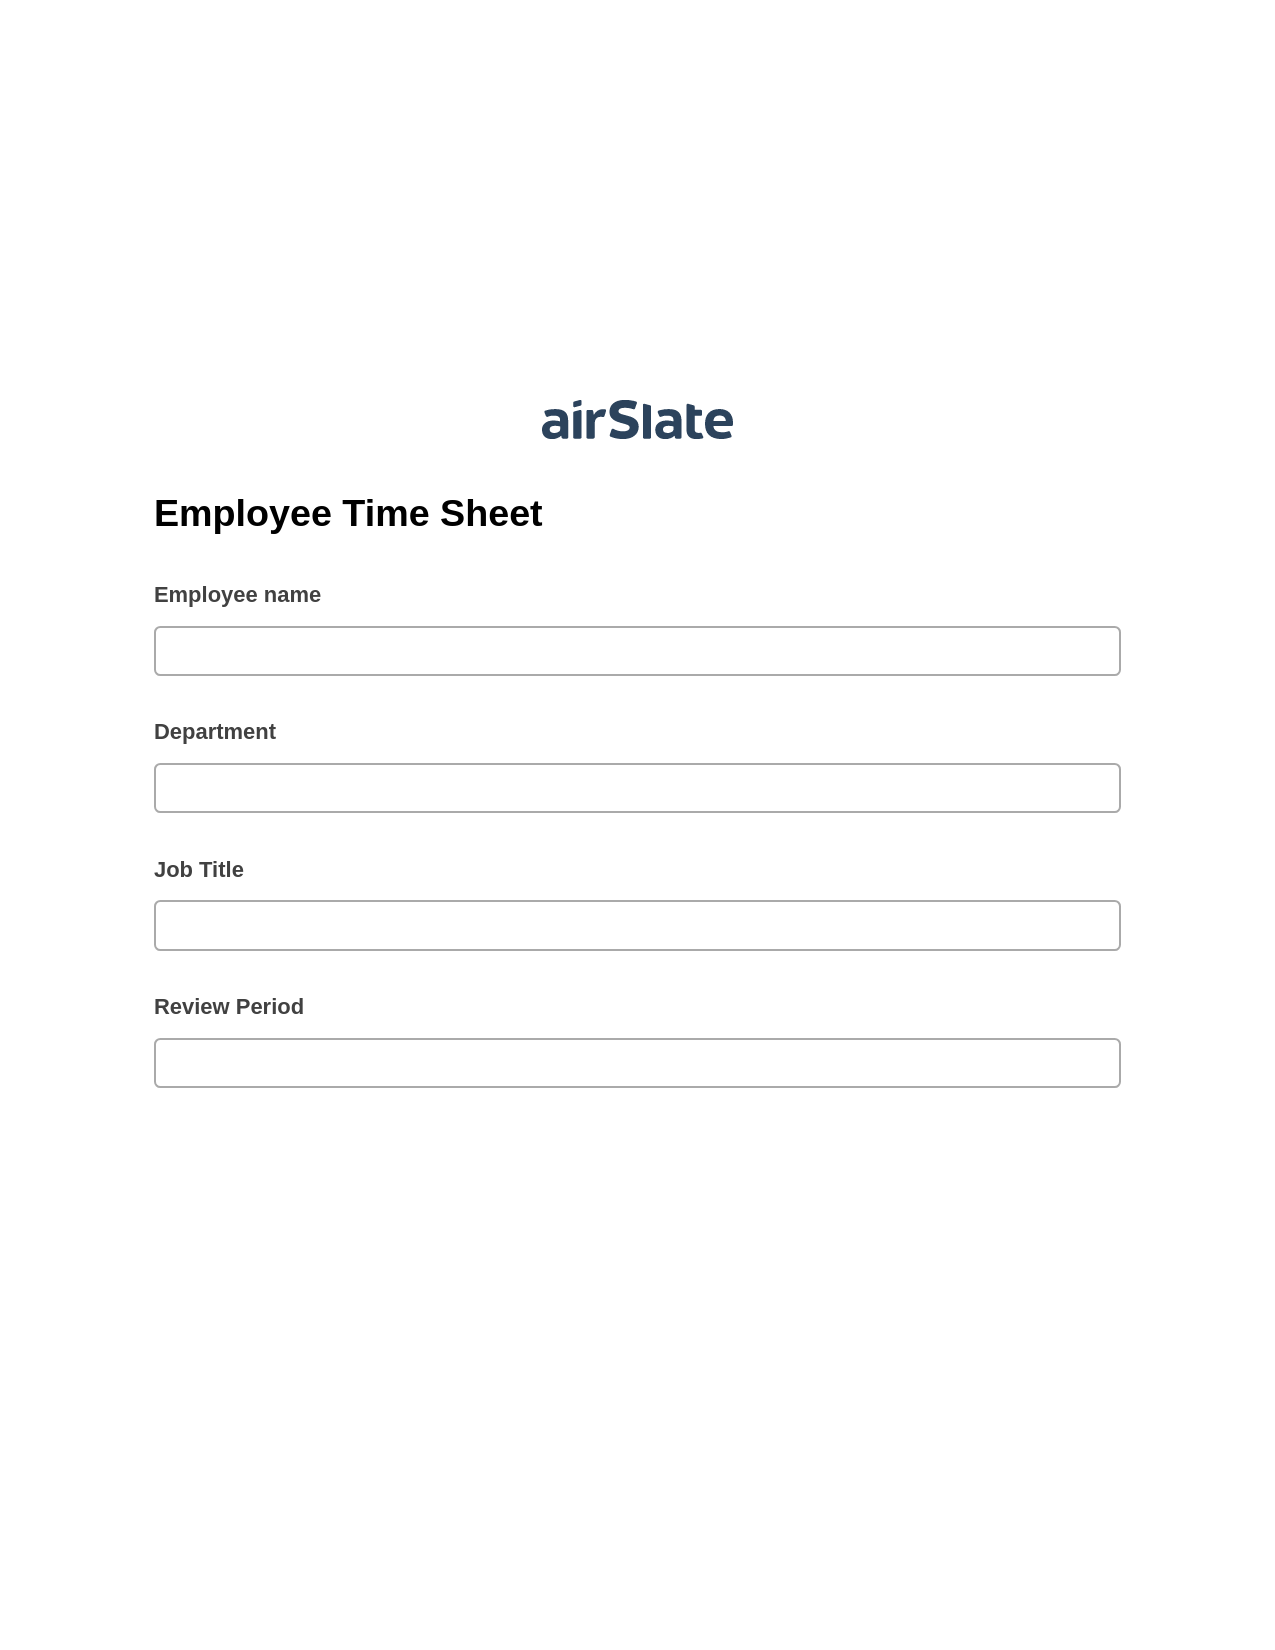 Employee Time Sheet Pre-fill from Excel Spreadsheet Bot, Export to MS Dynamics 365 Bot, Export to Google Sheet Bot